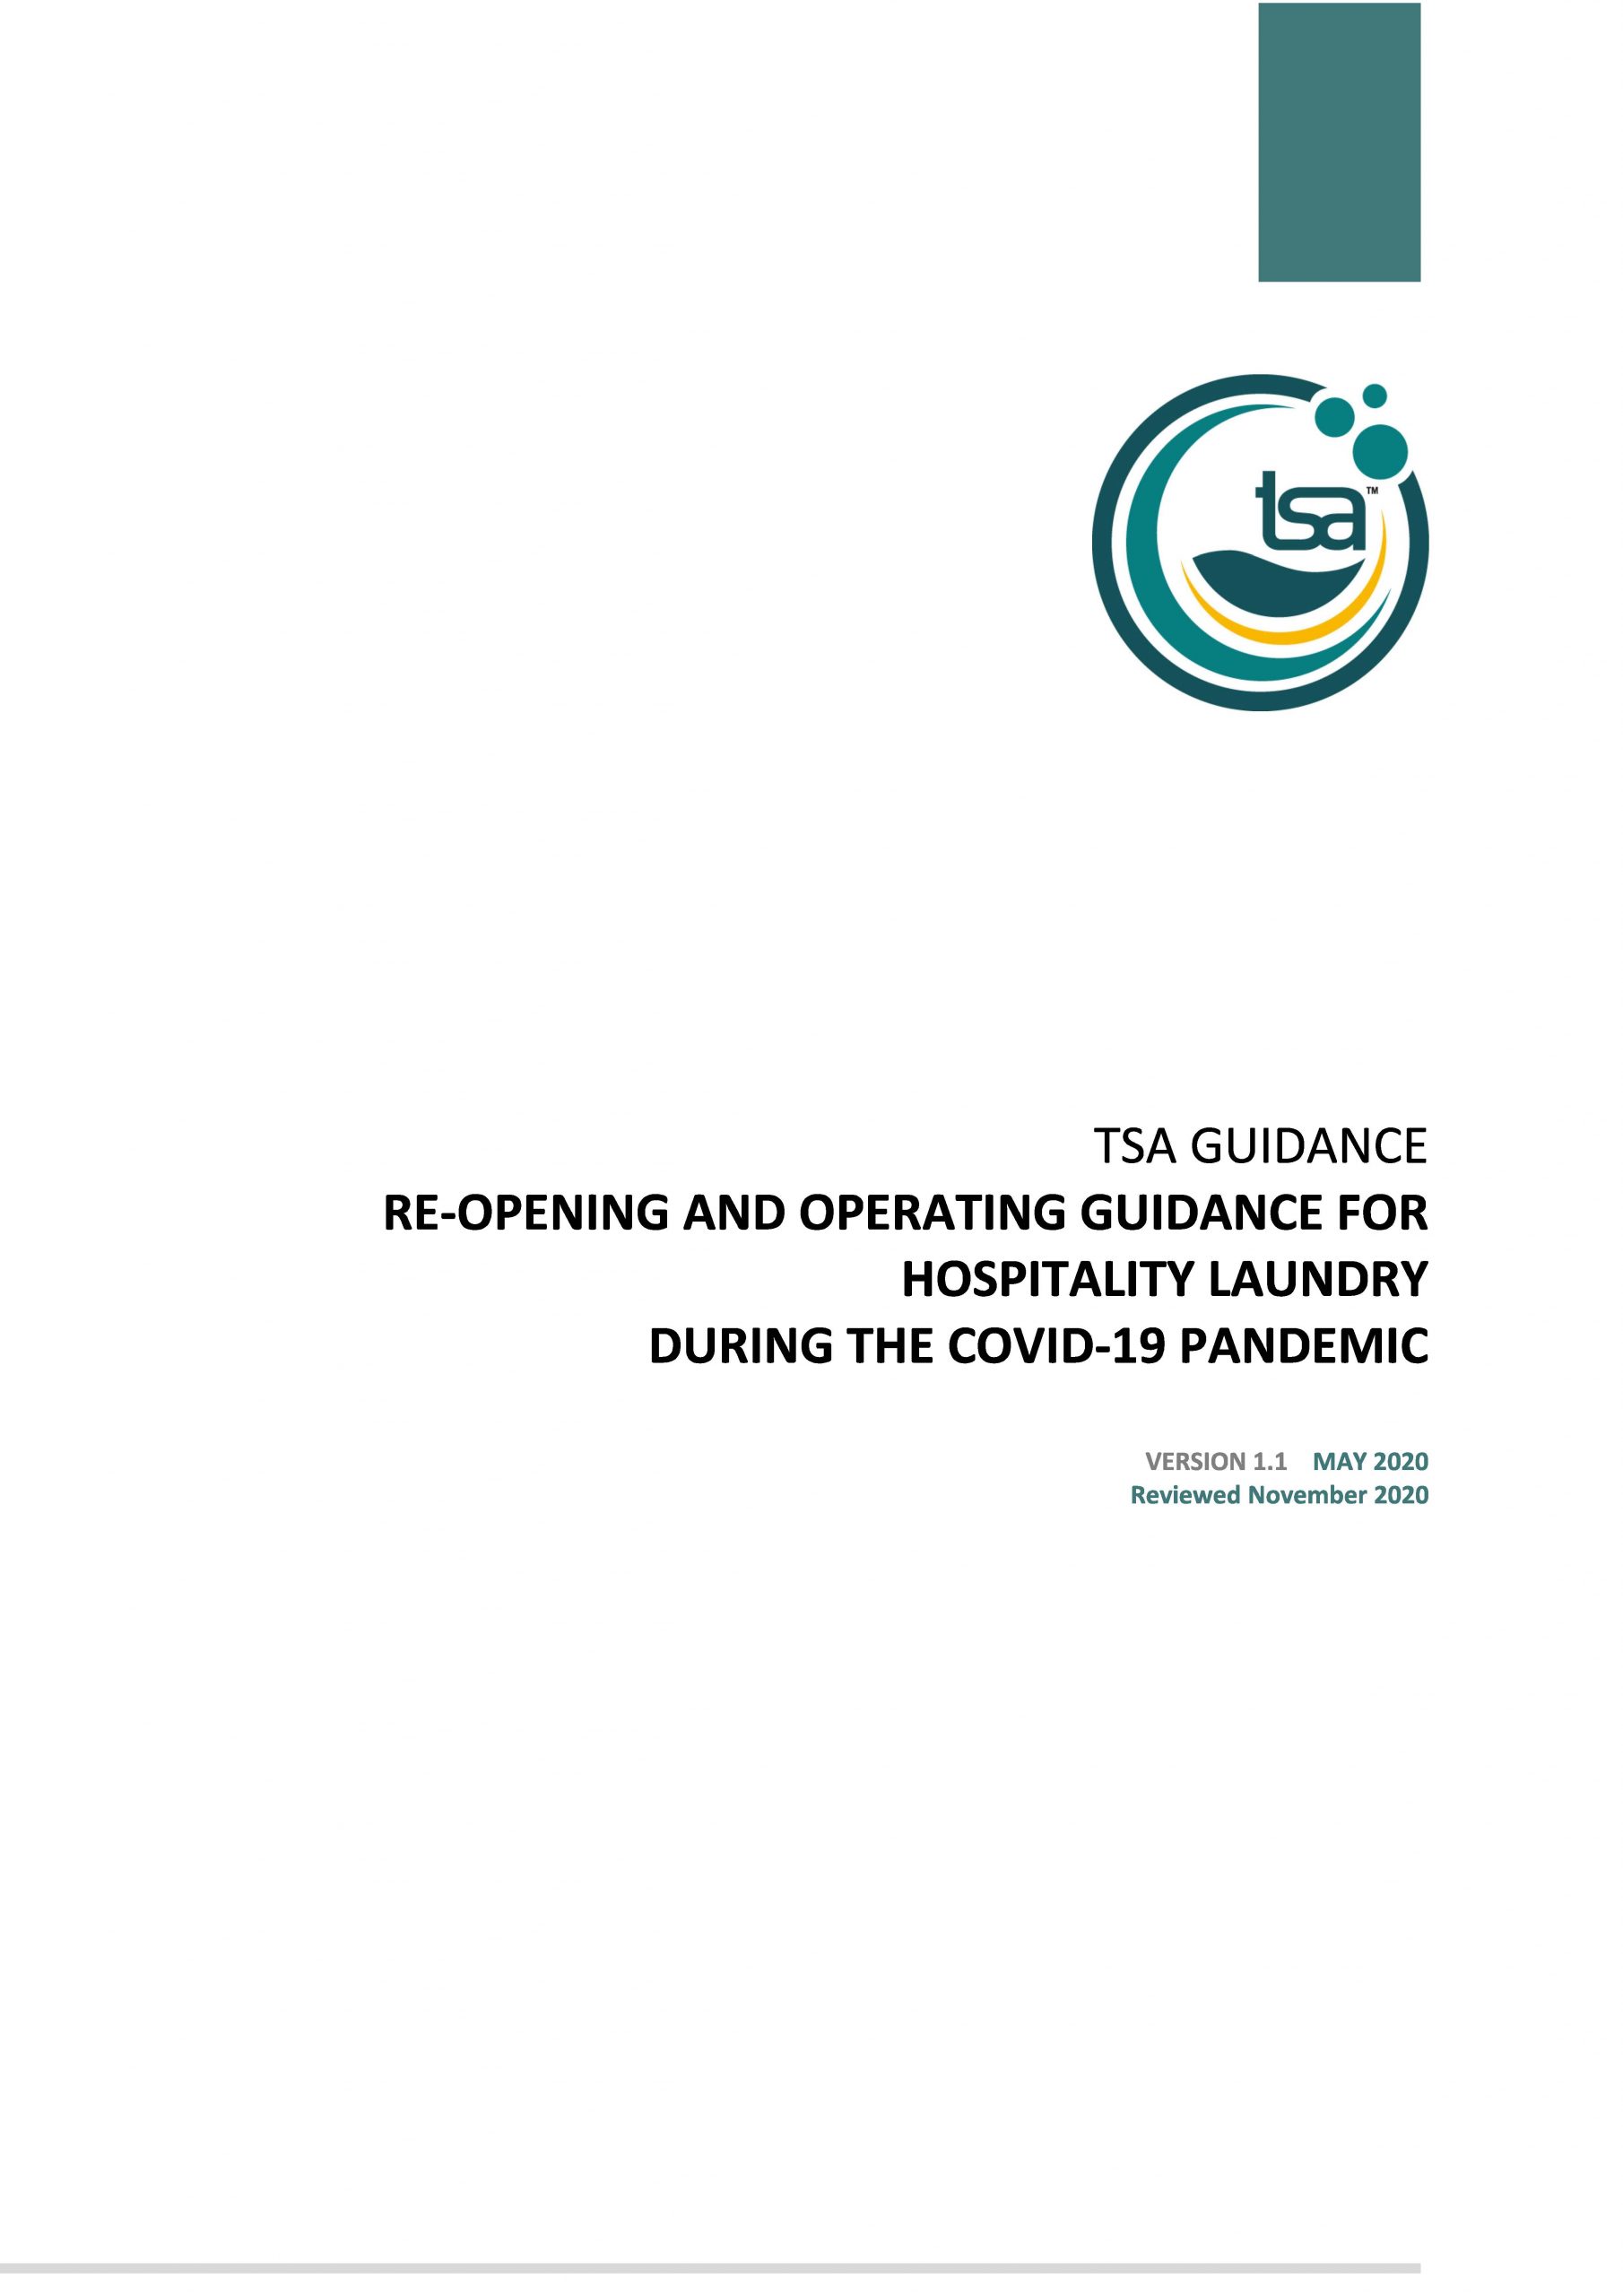 TSA Reopening and Operating Guidance During COVID-19 - Version 1.1